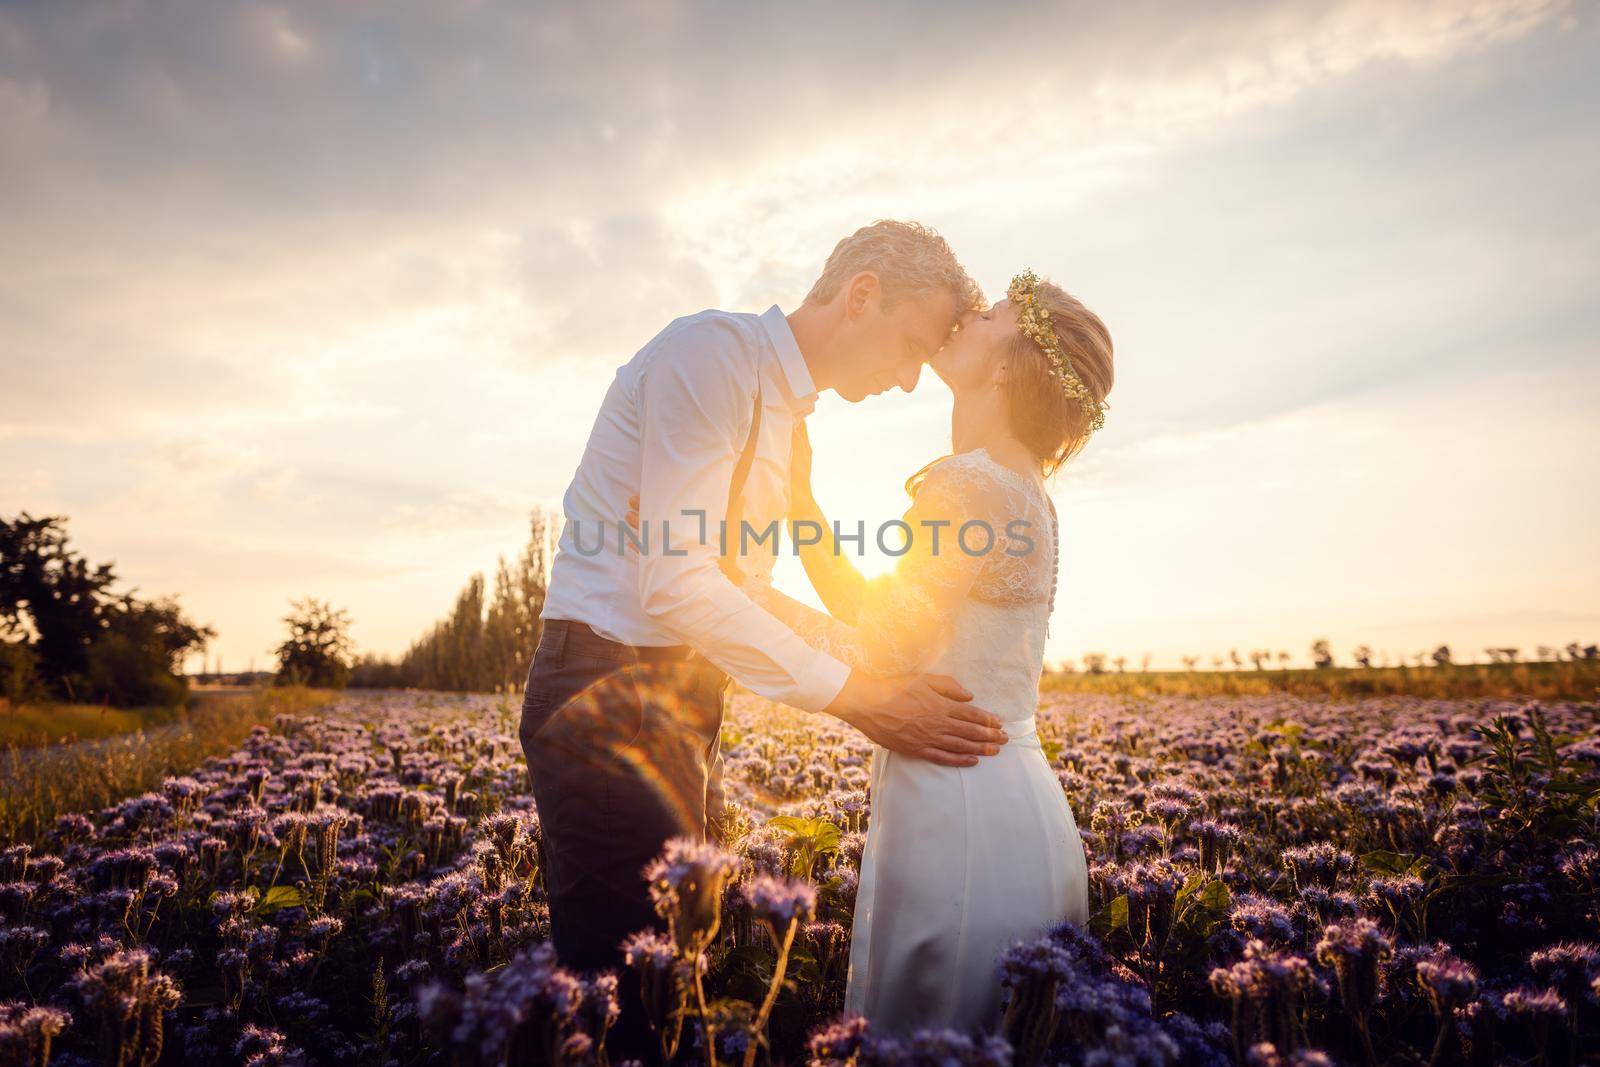 Romantic wedding in the countryside, bride kissing the groom by Kzenon